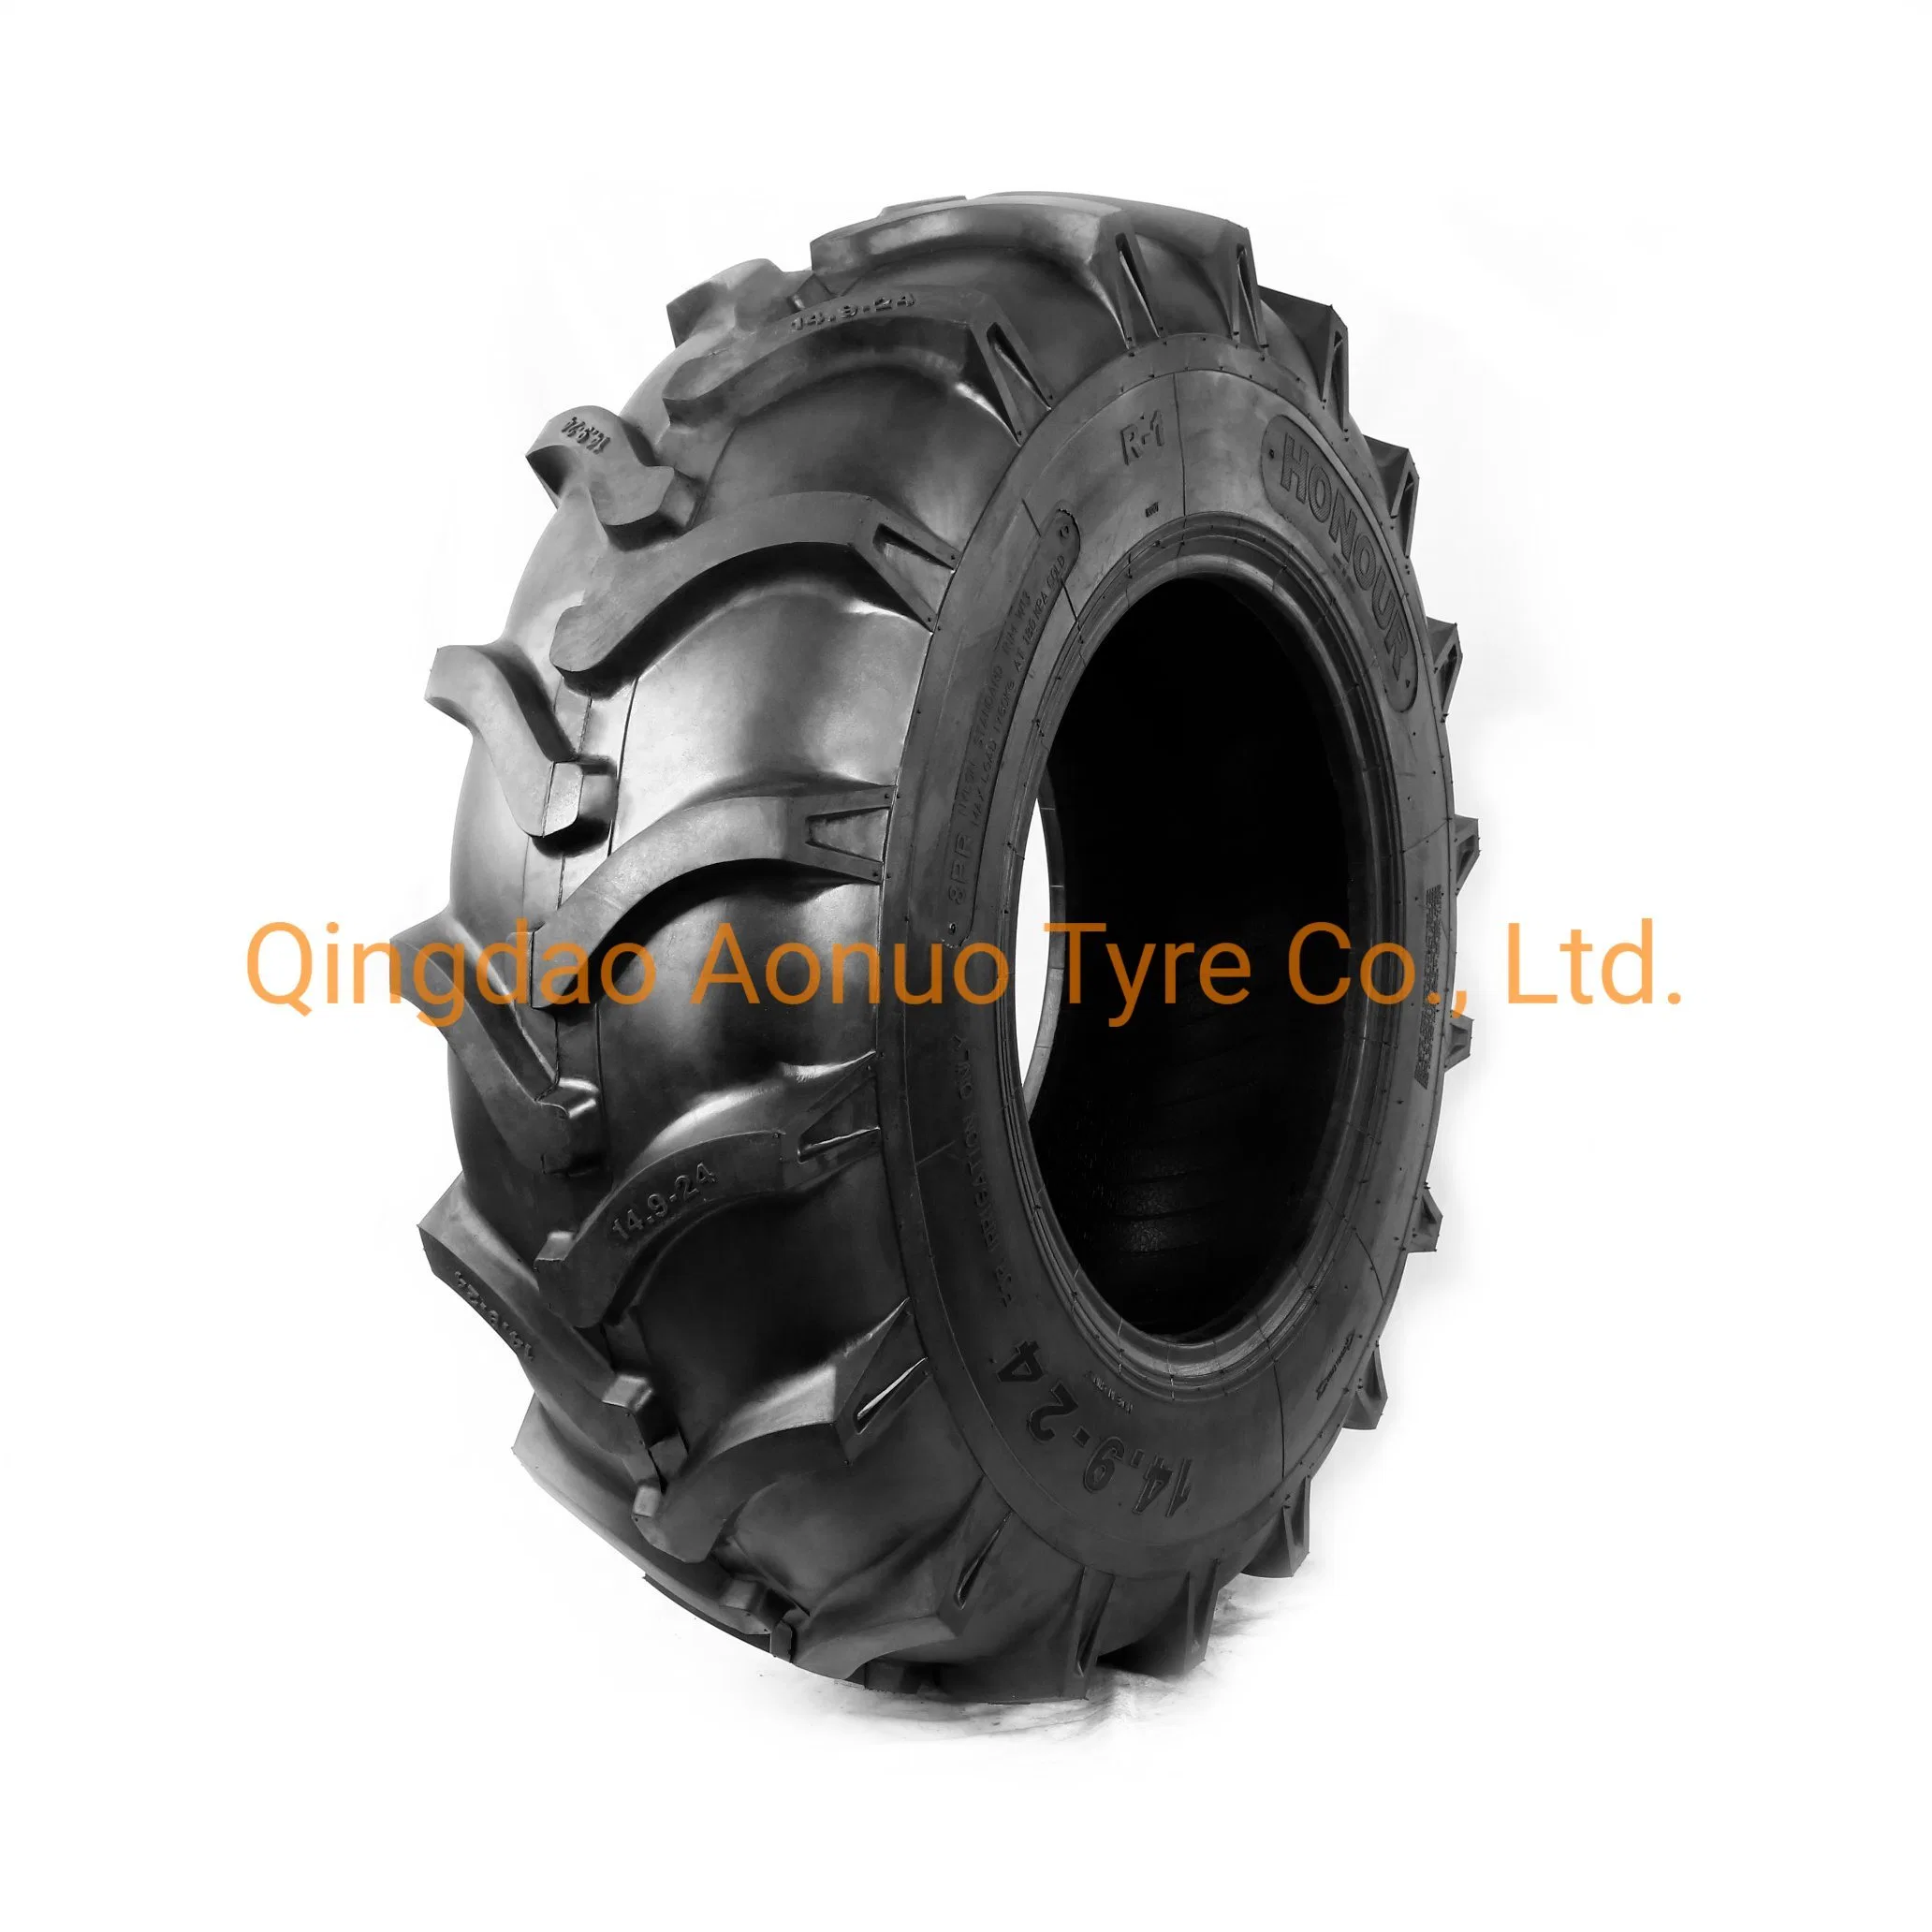 Manufacture High Quality Bias Tractor Agricultural Tires Farm Tyre (23.1-26 18.4-30 600-16)